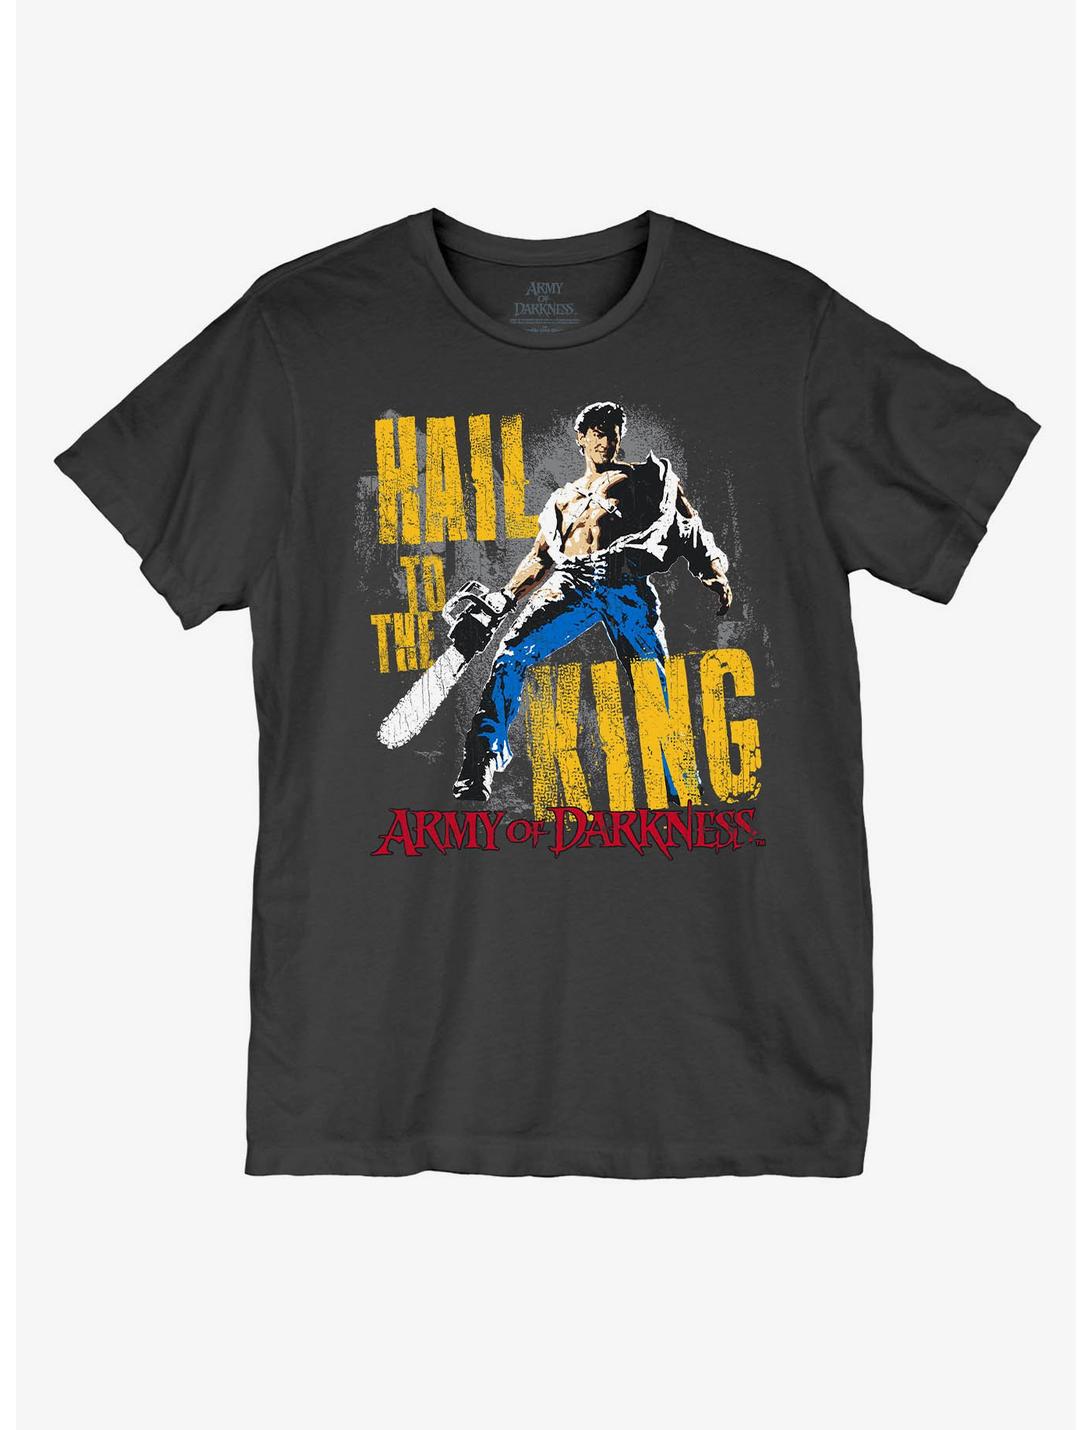 Army Of Darkness Hail To The King T-Shirt, BLACK, hi-res